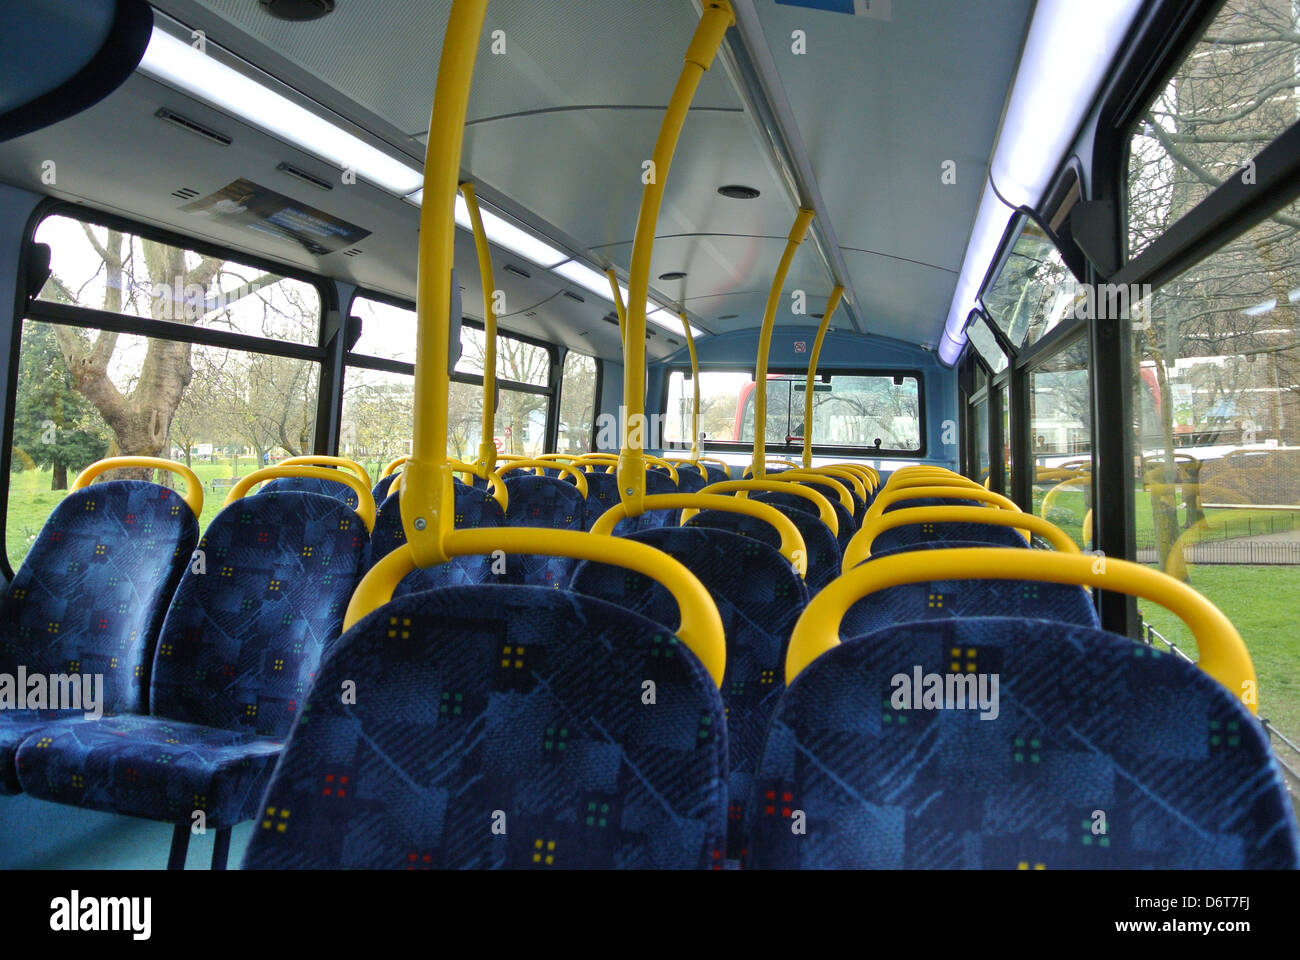 Top deck bus photography and images - Alamy